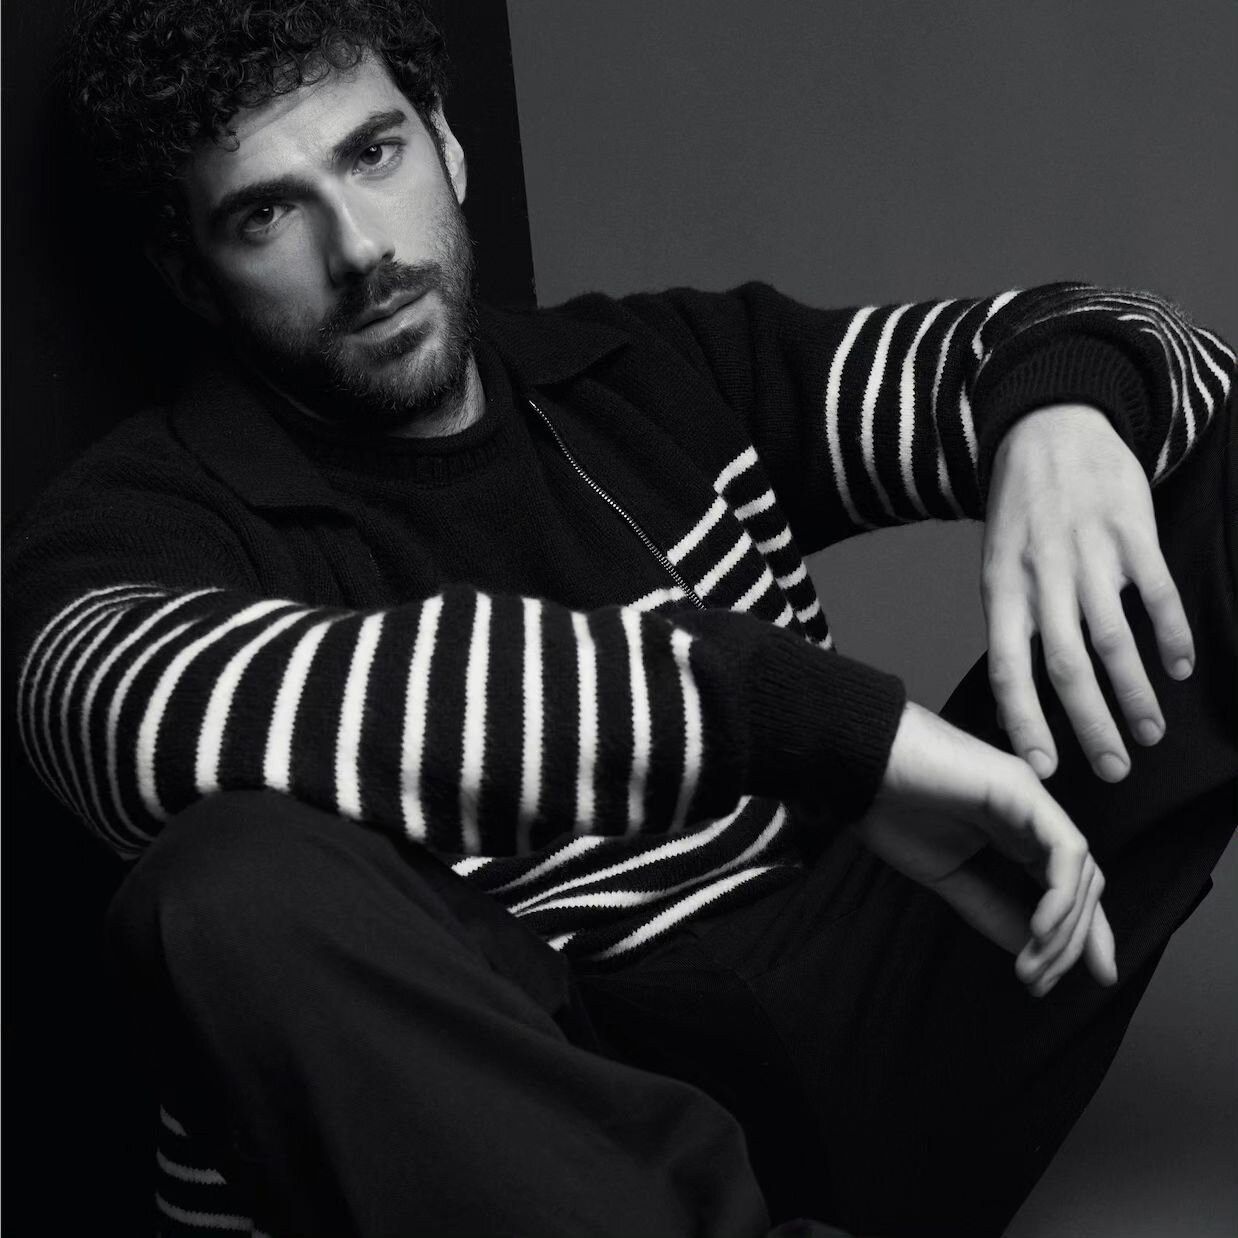 From the cobblestones of Ascoli to the bustling streets of Rome, Andrea Di Luigi's breakthrough materialized when he secured a role in Ferzan &Ouml;zpetek's (@ferzanozpetek) film Nuovo Olimpo produced by Netflix. Andrea is now set to star in the Ital